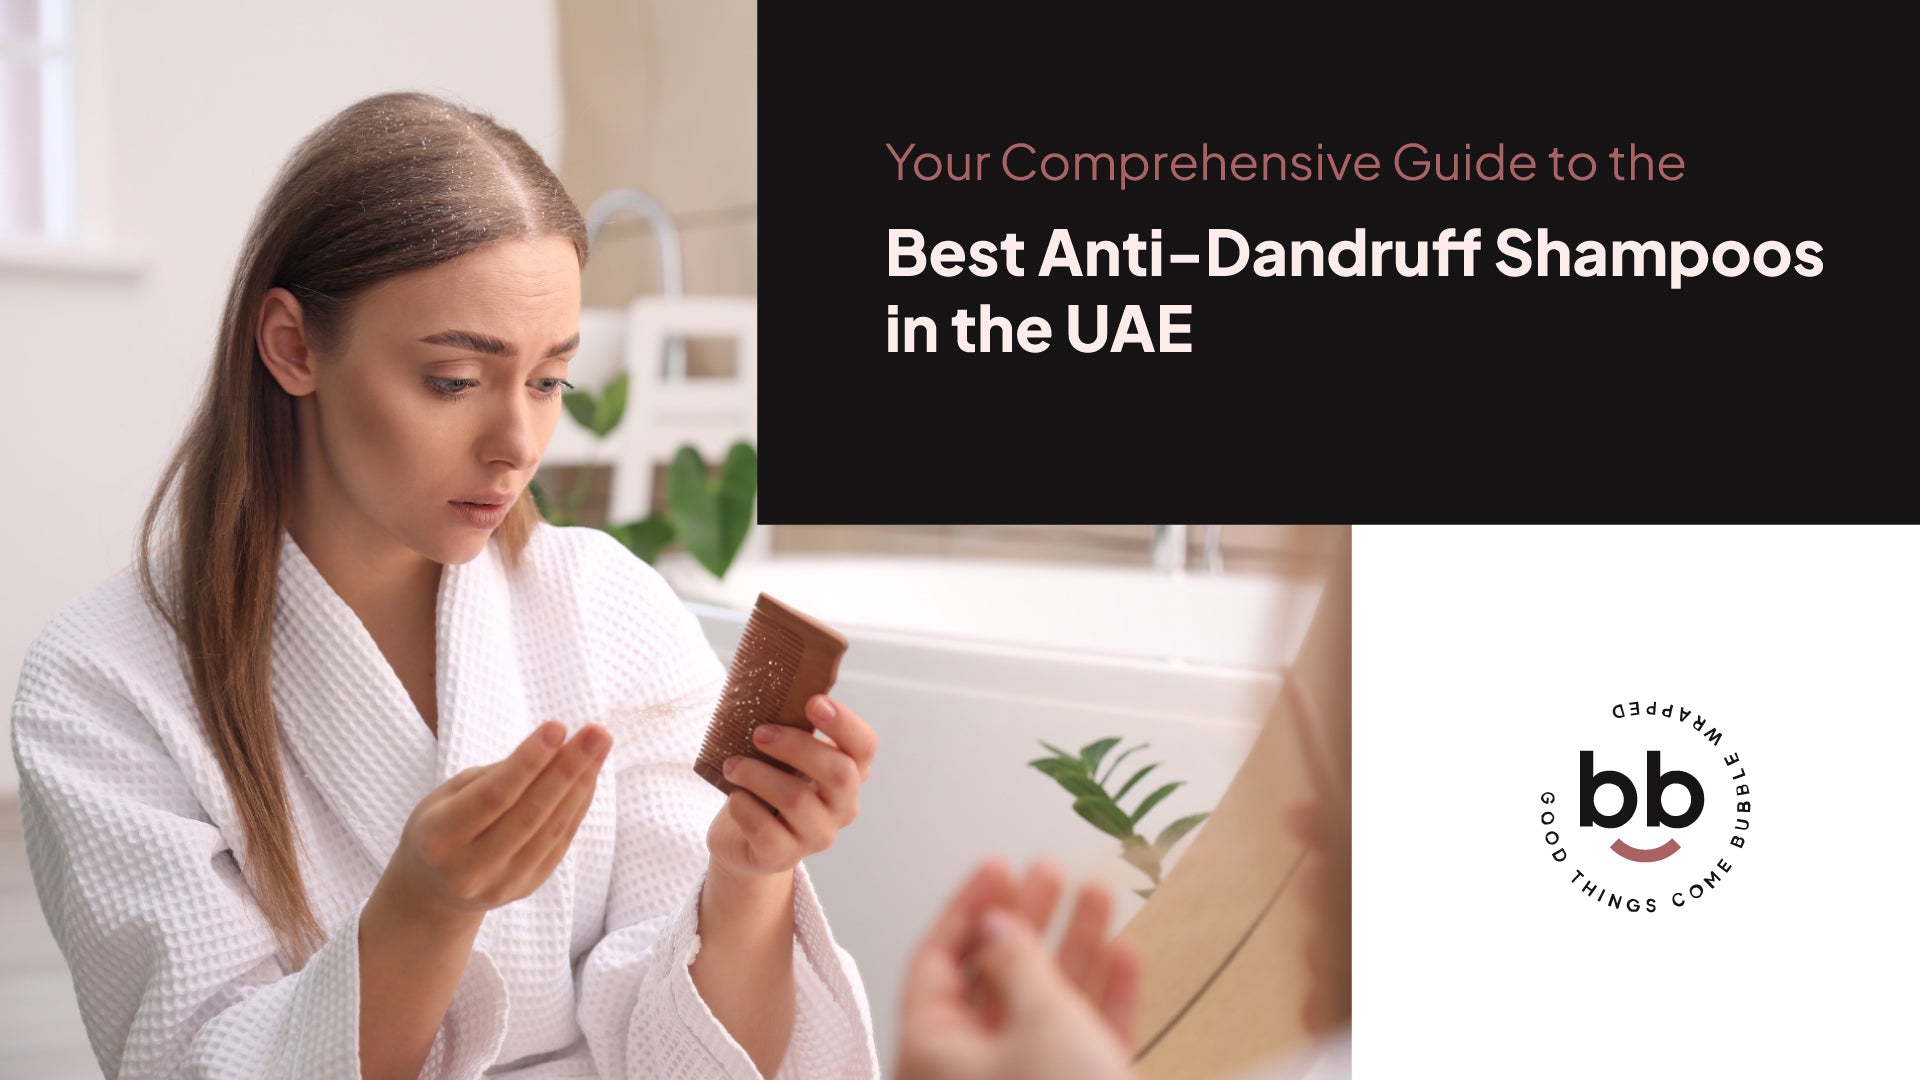 Your Comprehensive Guide to the Best Anti Dandruff Shampoos in the UAE